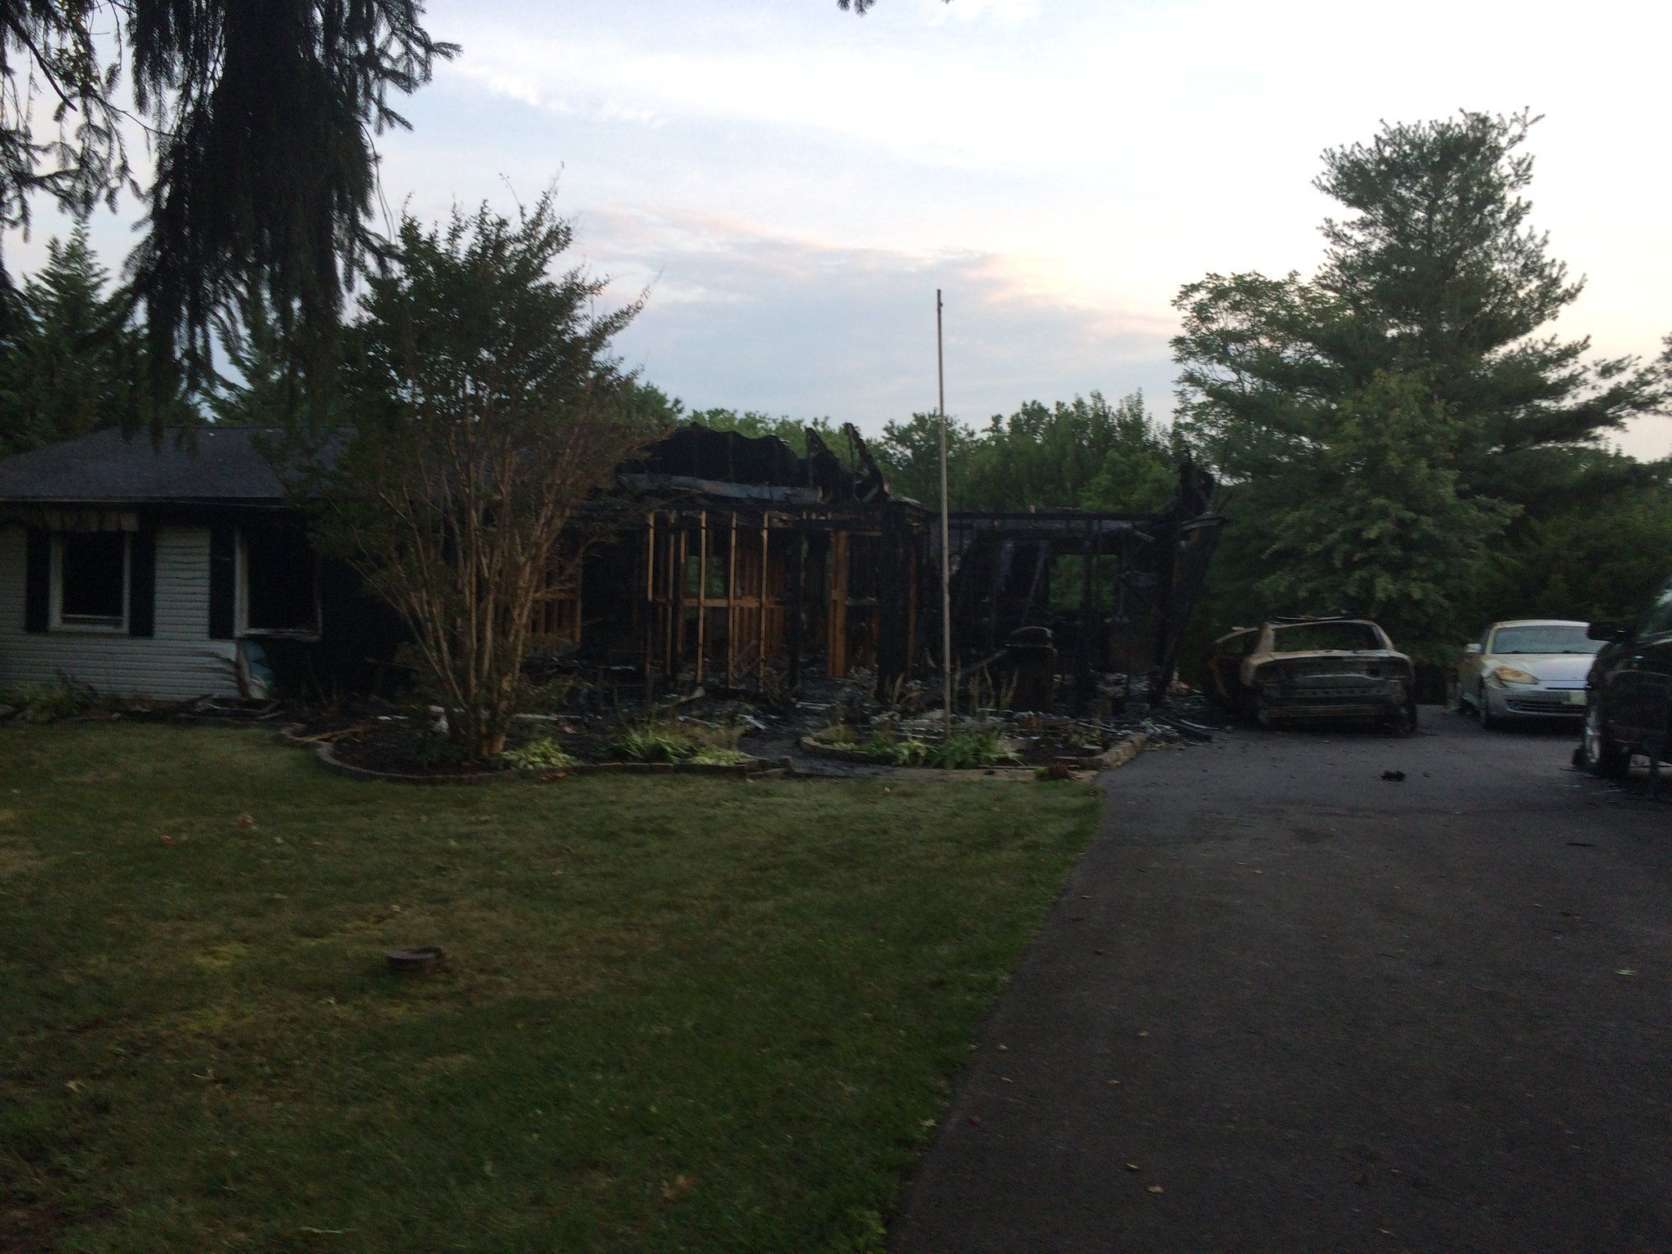 Two people were taken to the hospital after an early morning fire Friday in Montgomery County. (WTOP/Nick Iannelli)